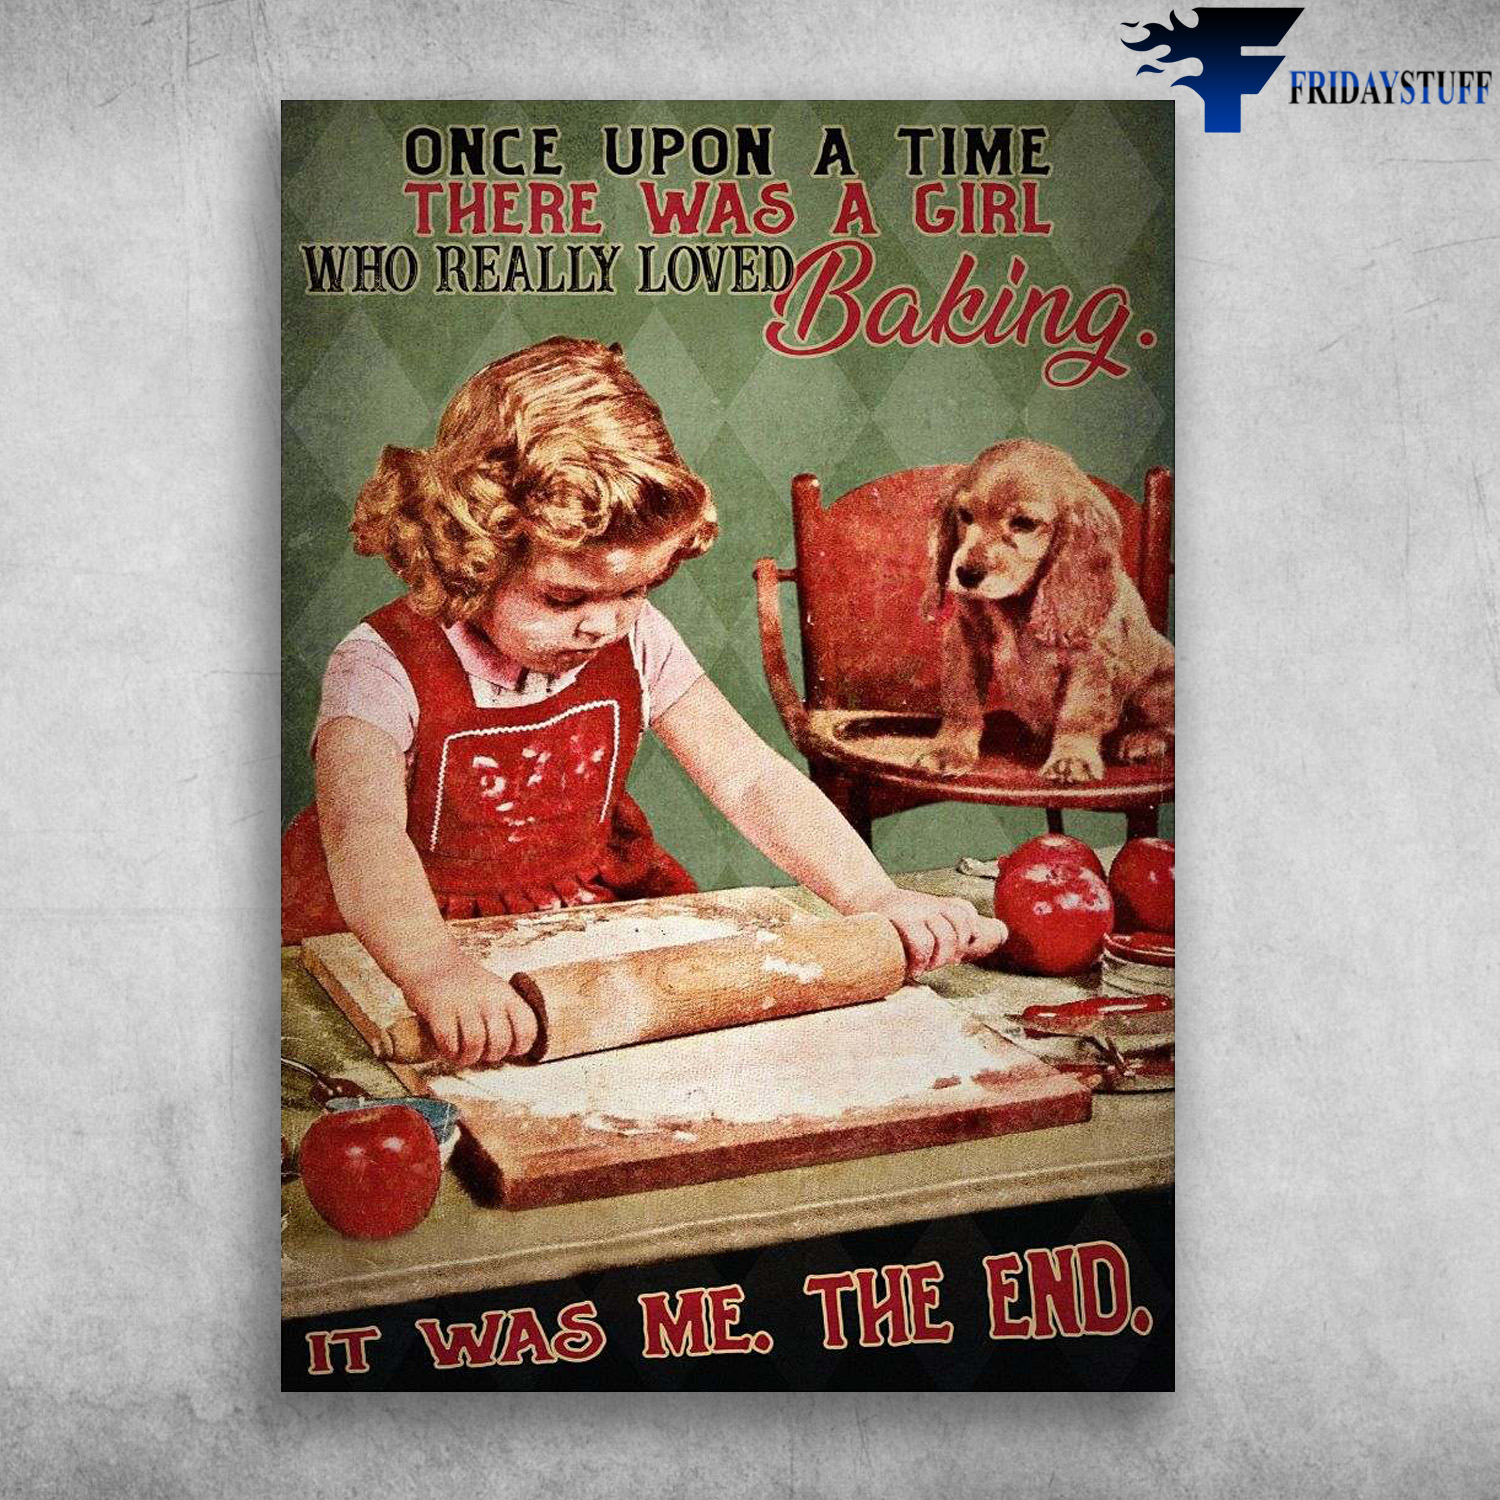 Little Girl Baking, Baking With Dog - Once Upon A Time, There Was A Girl, Who Really Loved Baking, It Was Me, The End